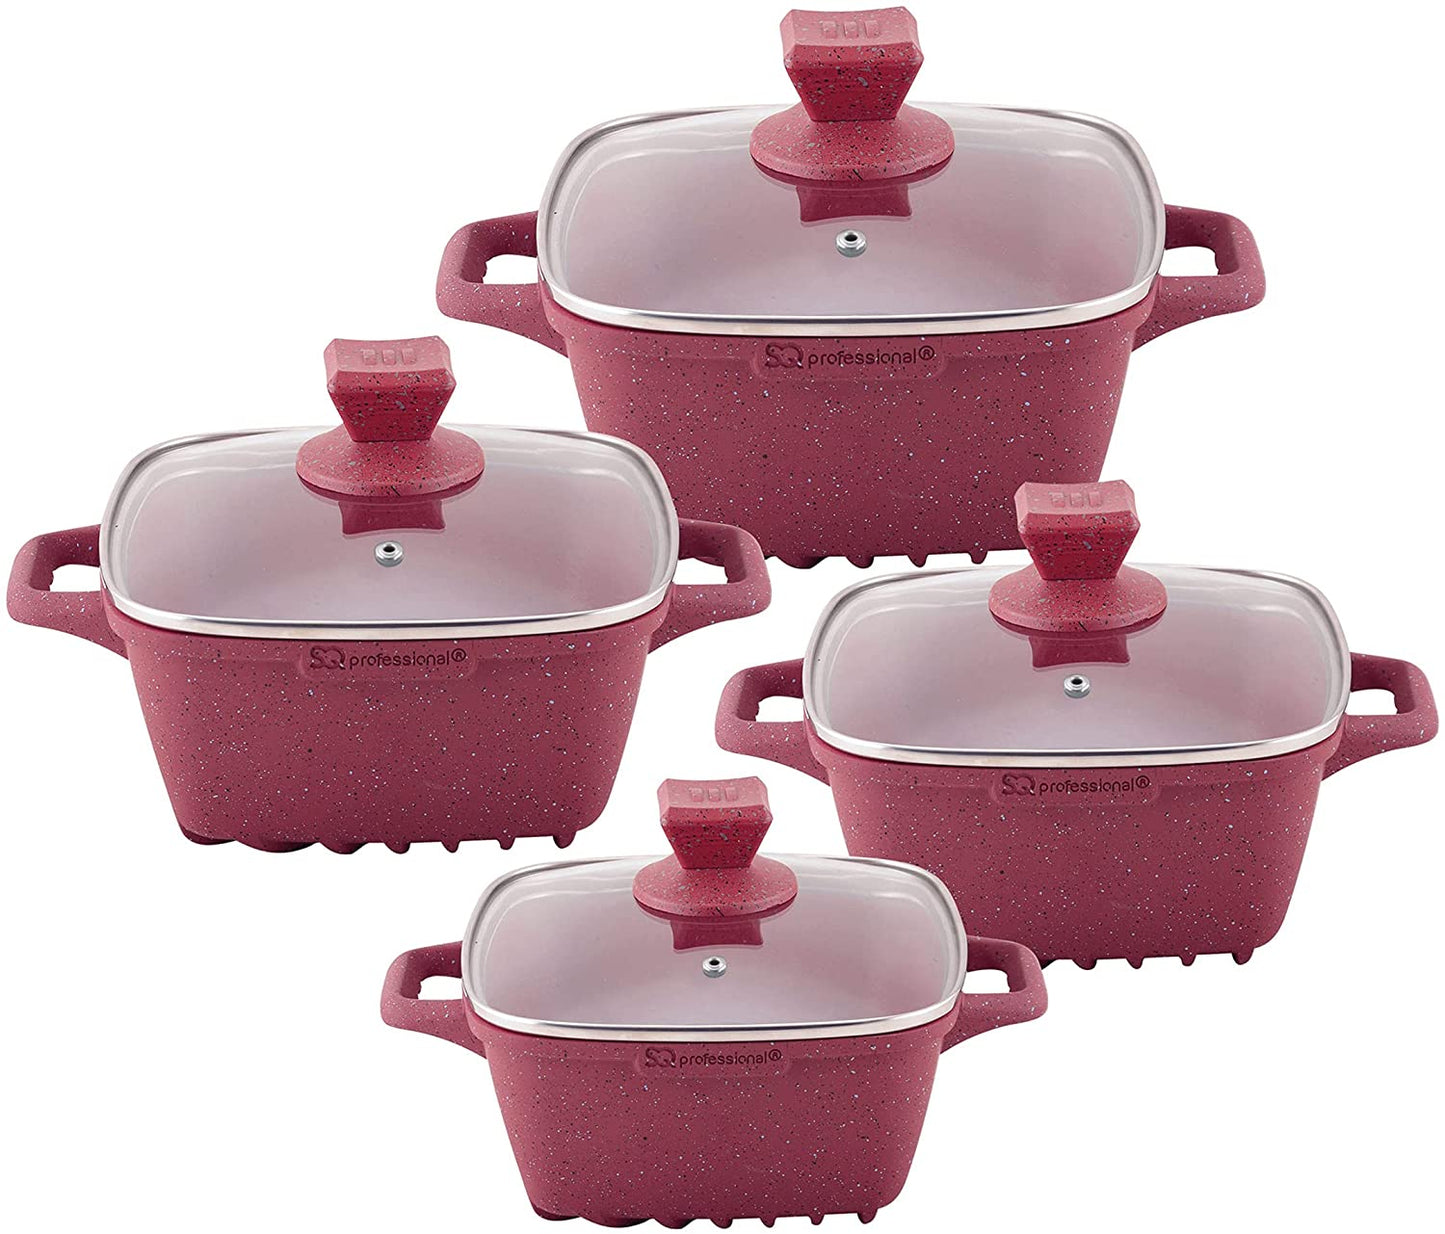 Nea Marbell Square Stockpot Set of 4 Rossa 6902 (Big Parcel Rate)